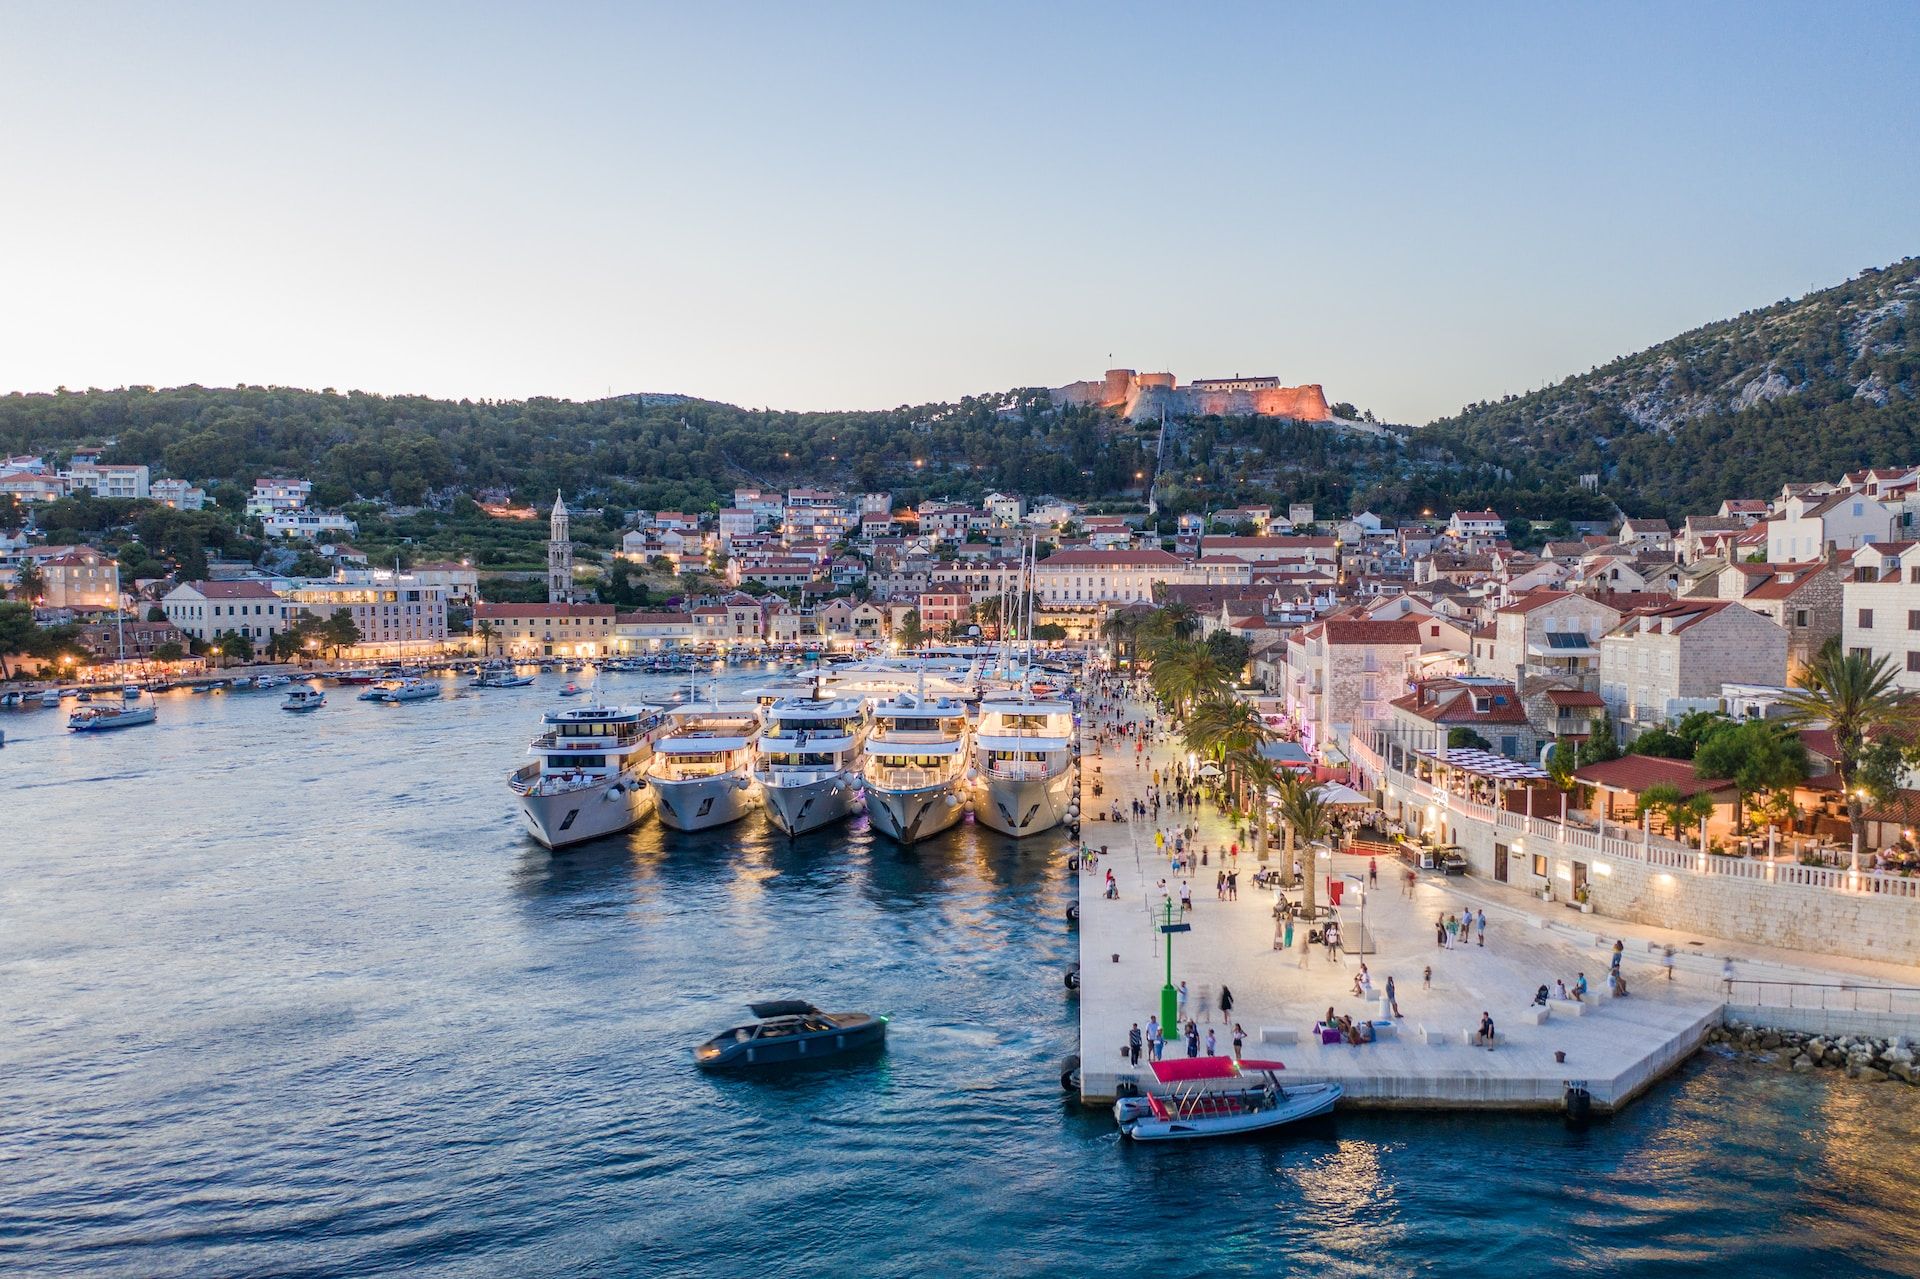 Aerial view of Hvar, Croatia featuring boats and people  